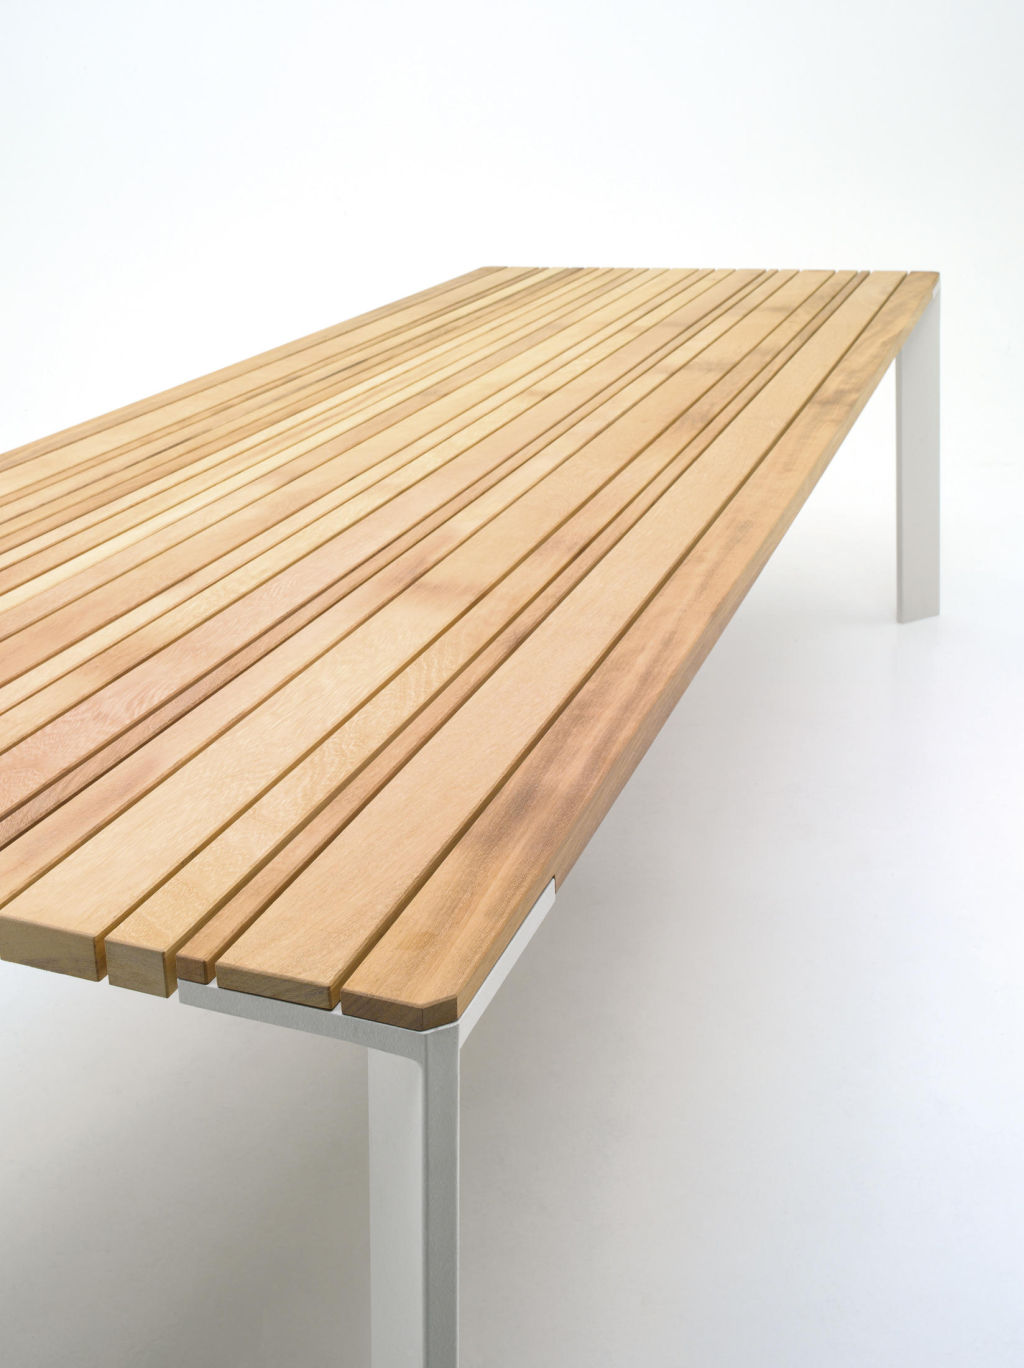 Dining Table - Paola Lenti, Sunset Photo: Supplied